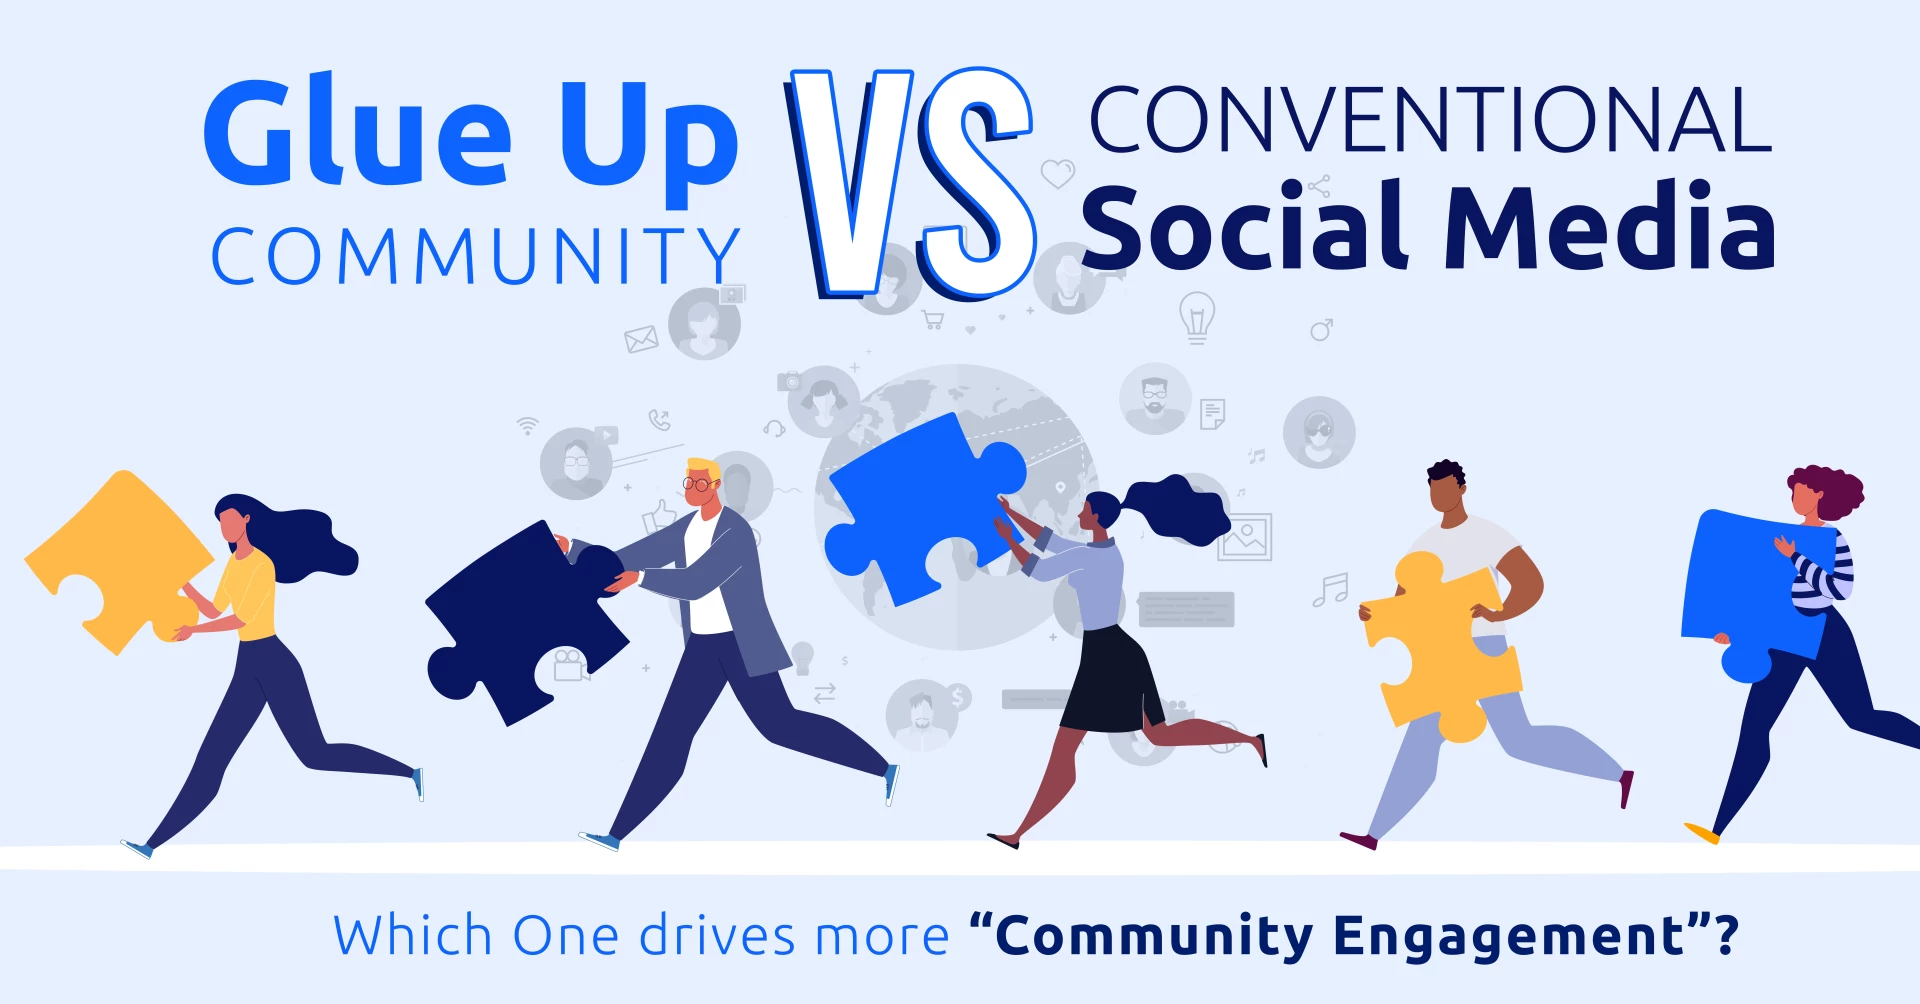 Glue Up Community vs. Conventional Social Media - Which One Drives More Community Engagement?